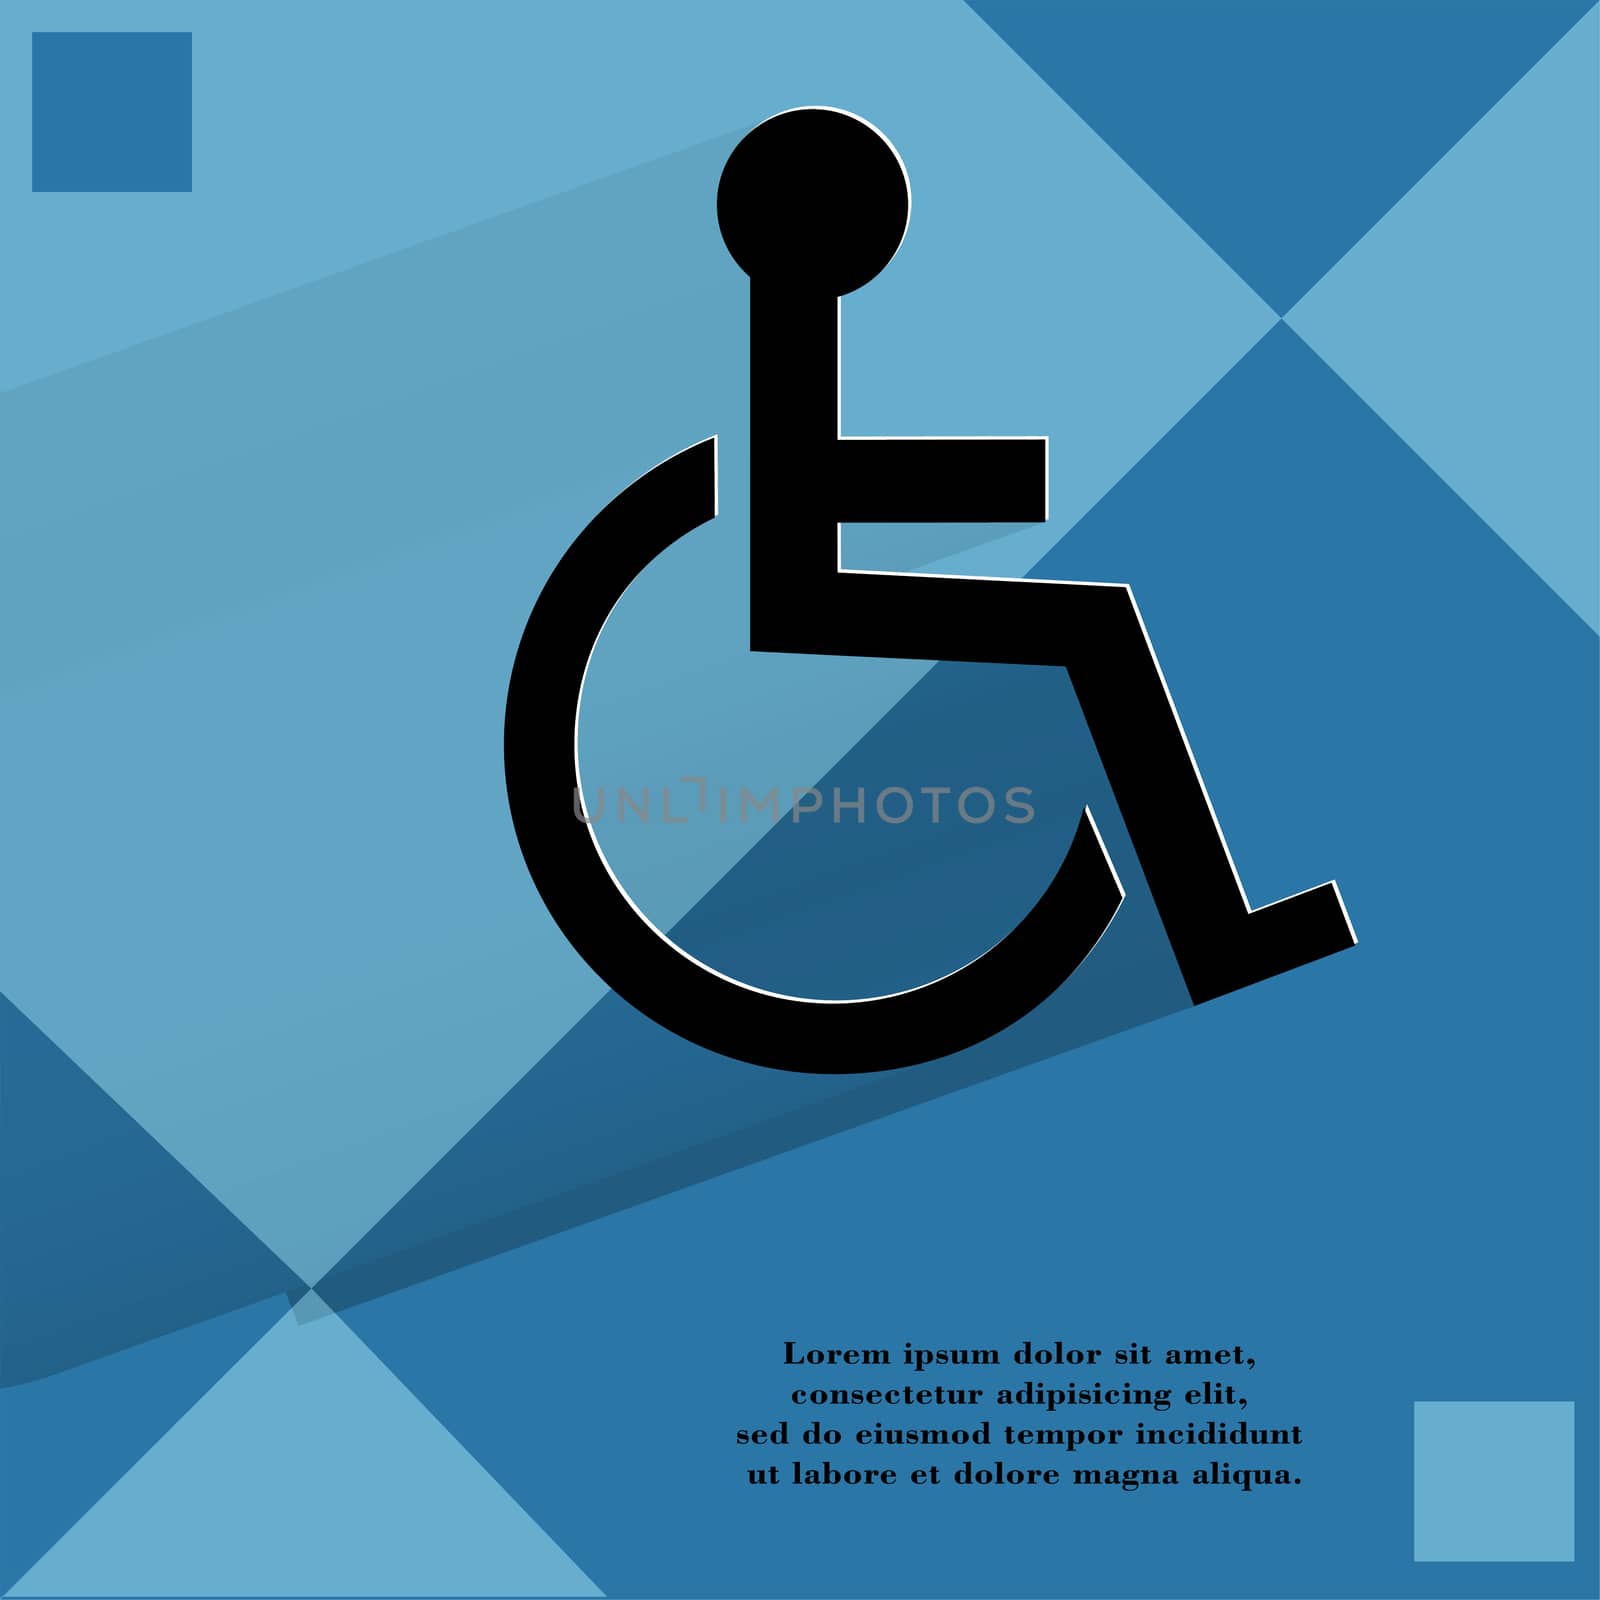 disabled. Flat modern web design on a flat geometric abstract background . 